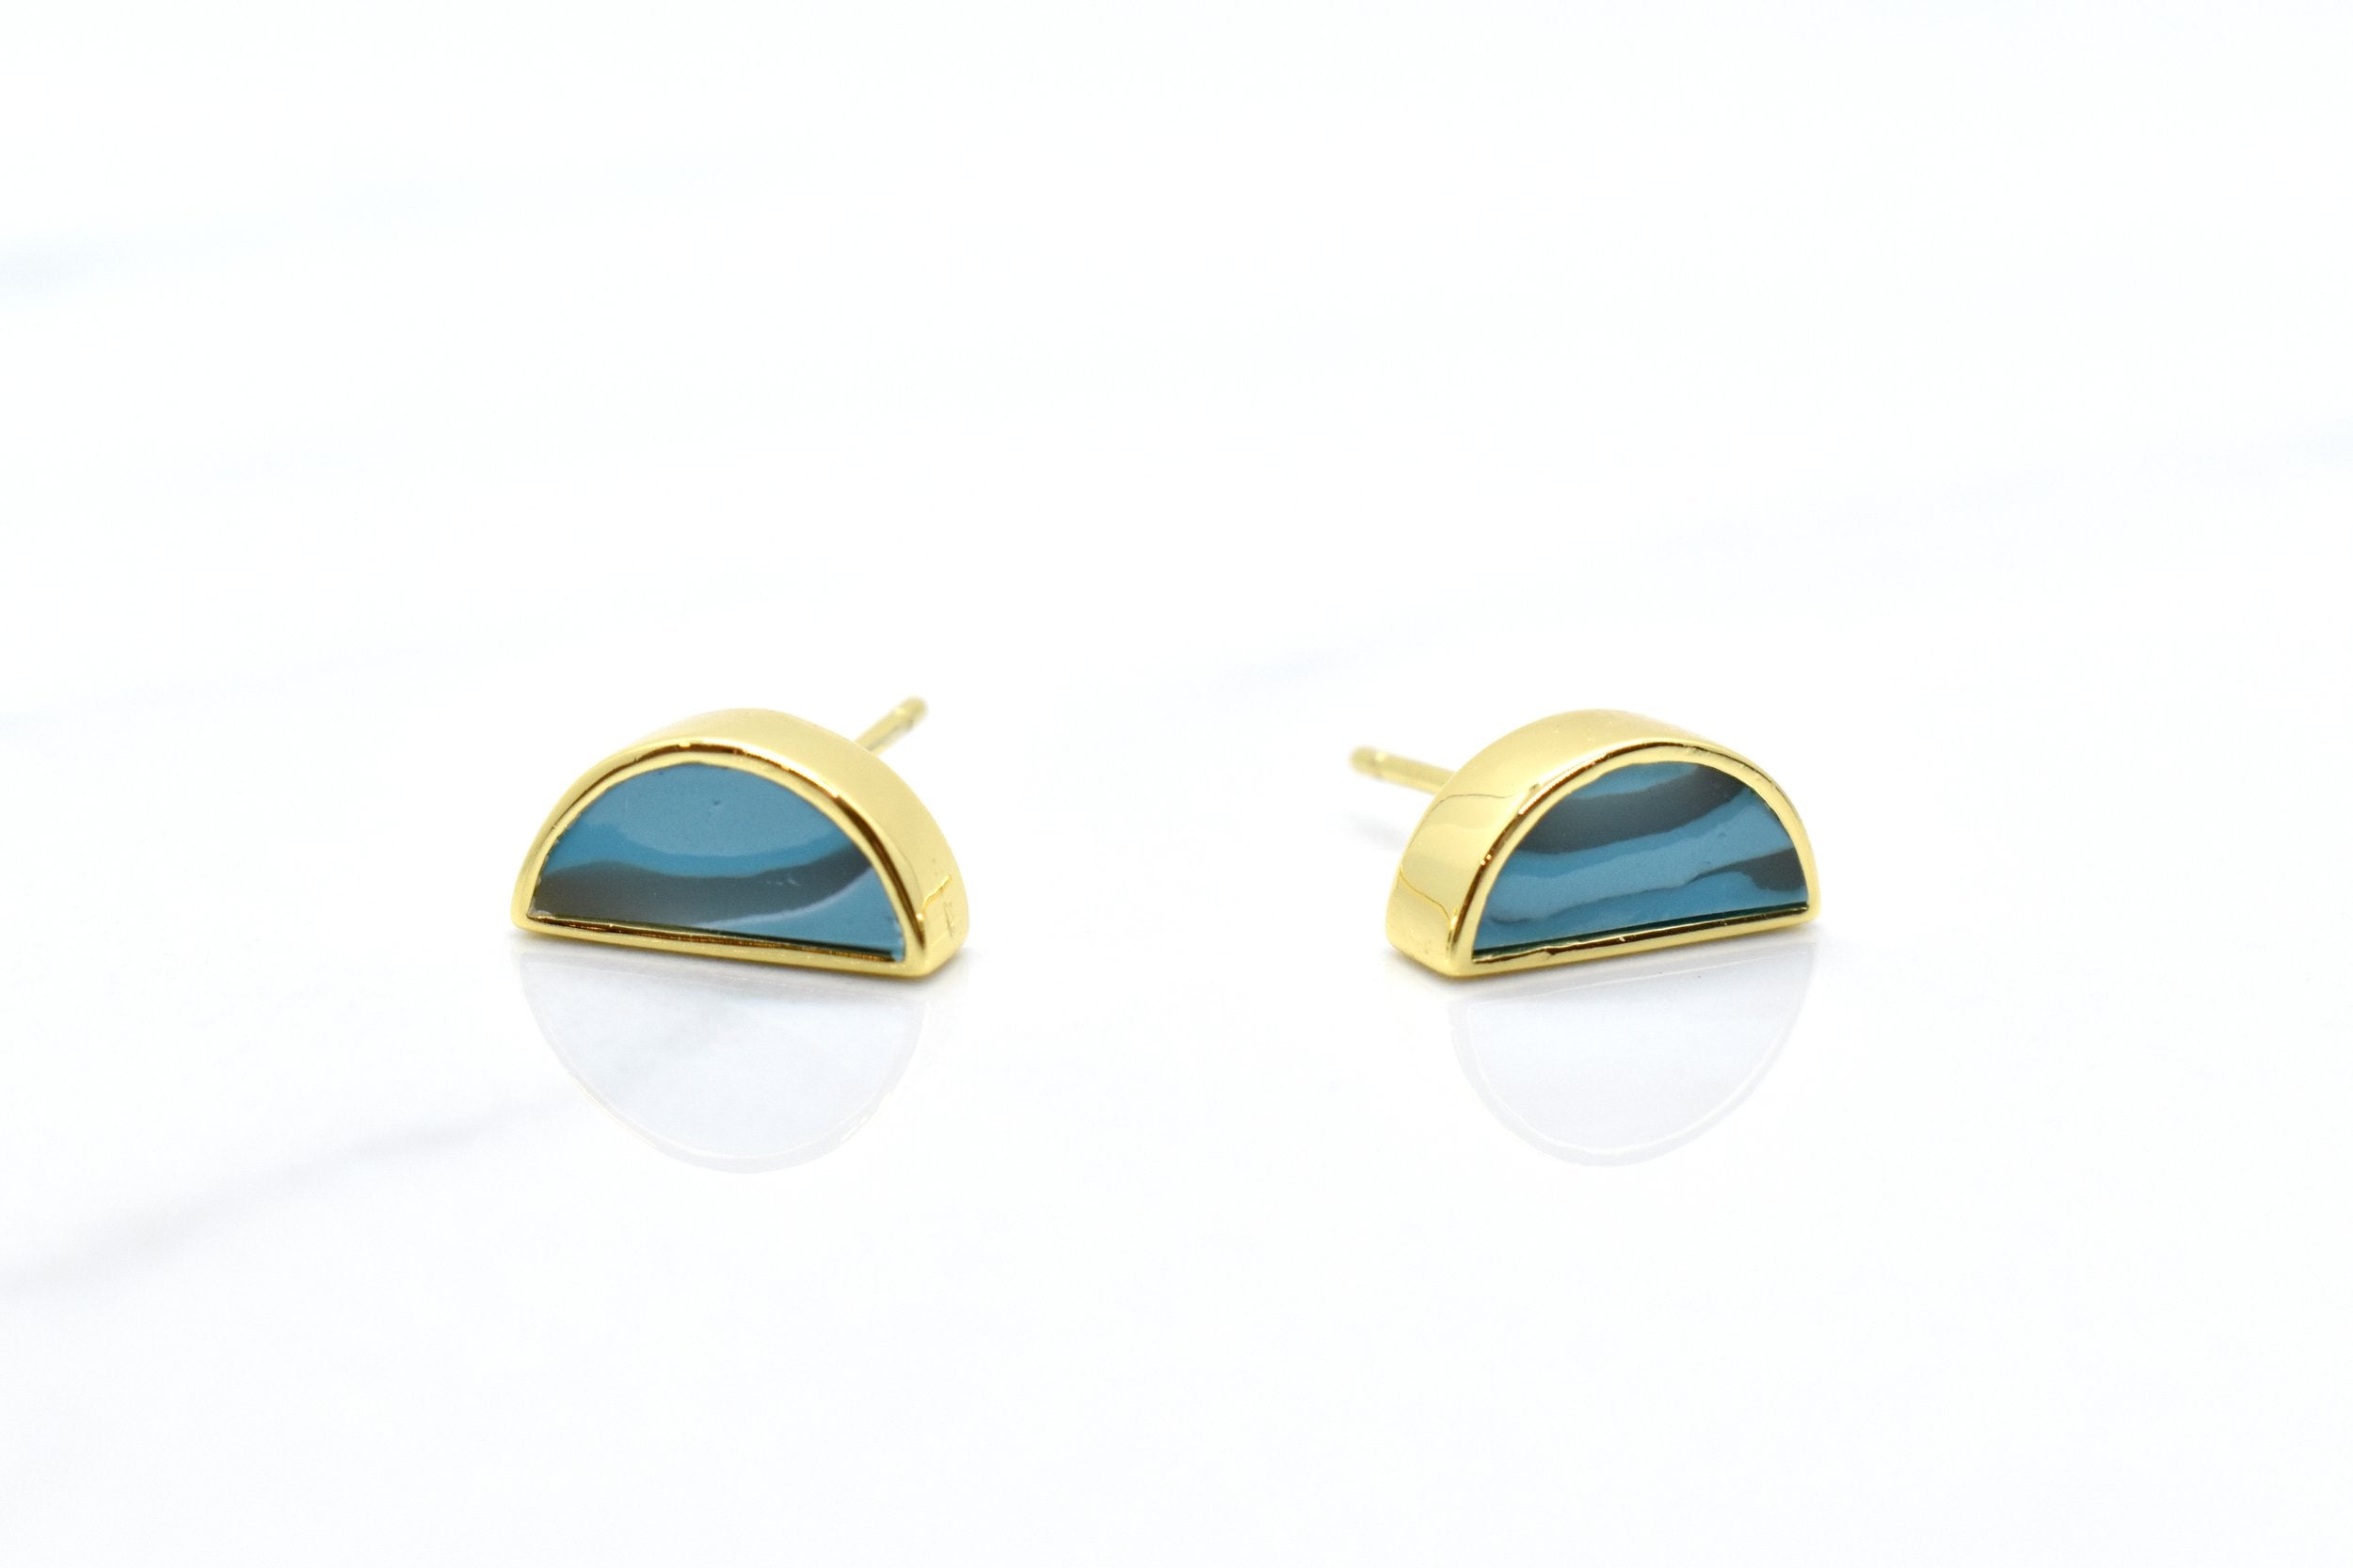 gold triangle stud earring set in aquamarine gemstone clay shown from the front